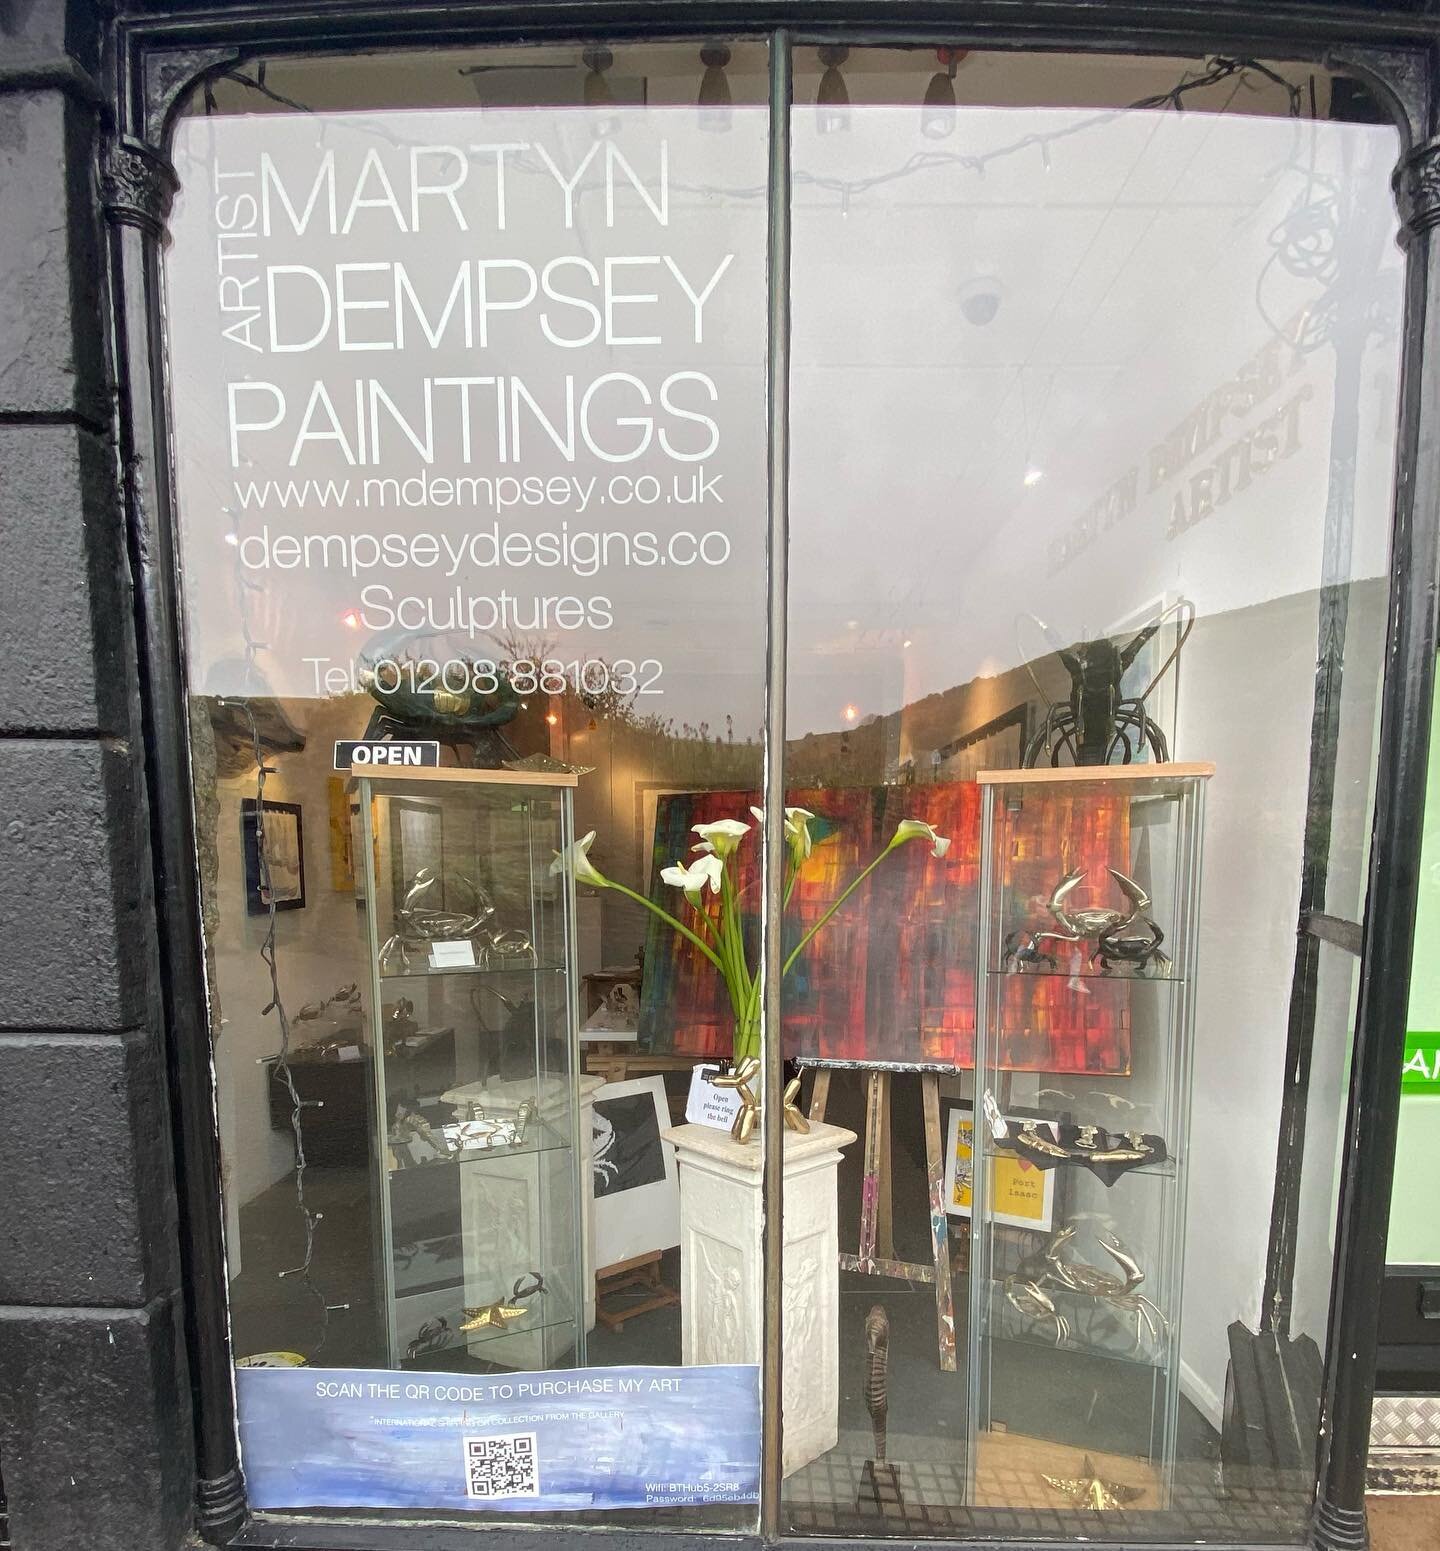 Time to come in and have a wonder at our beautiful gallery in Port Isaac. You can shop the collection using the QR code also in the window #qr #art #shopping #design #gallery #portisaac #martyn #paintings #sculptures #bronze #cornwall @martyndempseyo